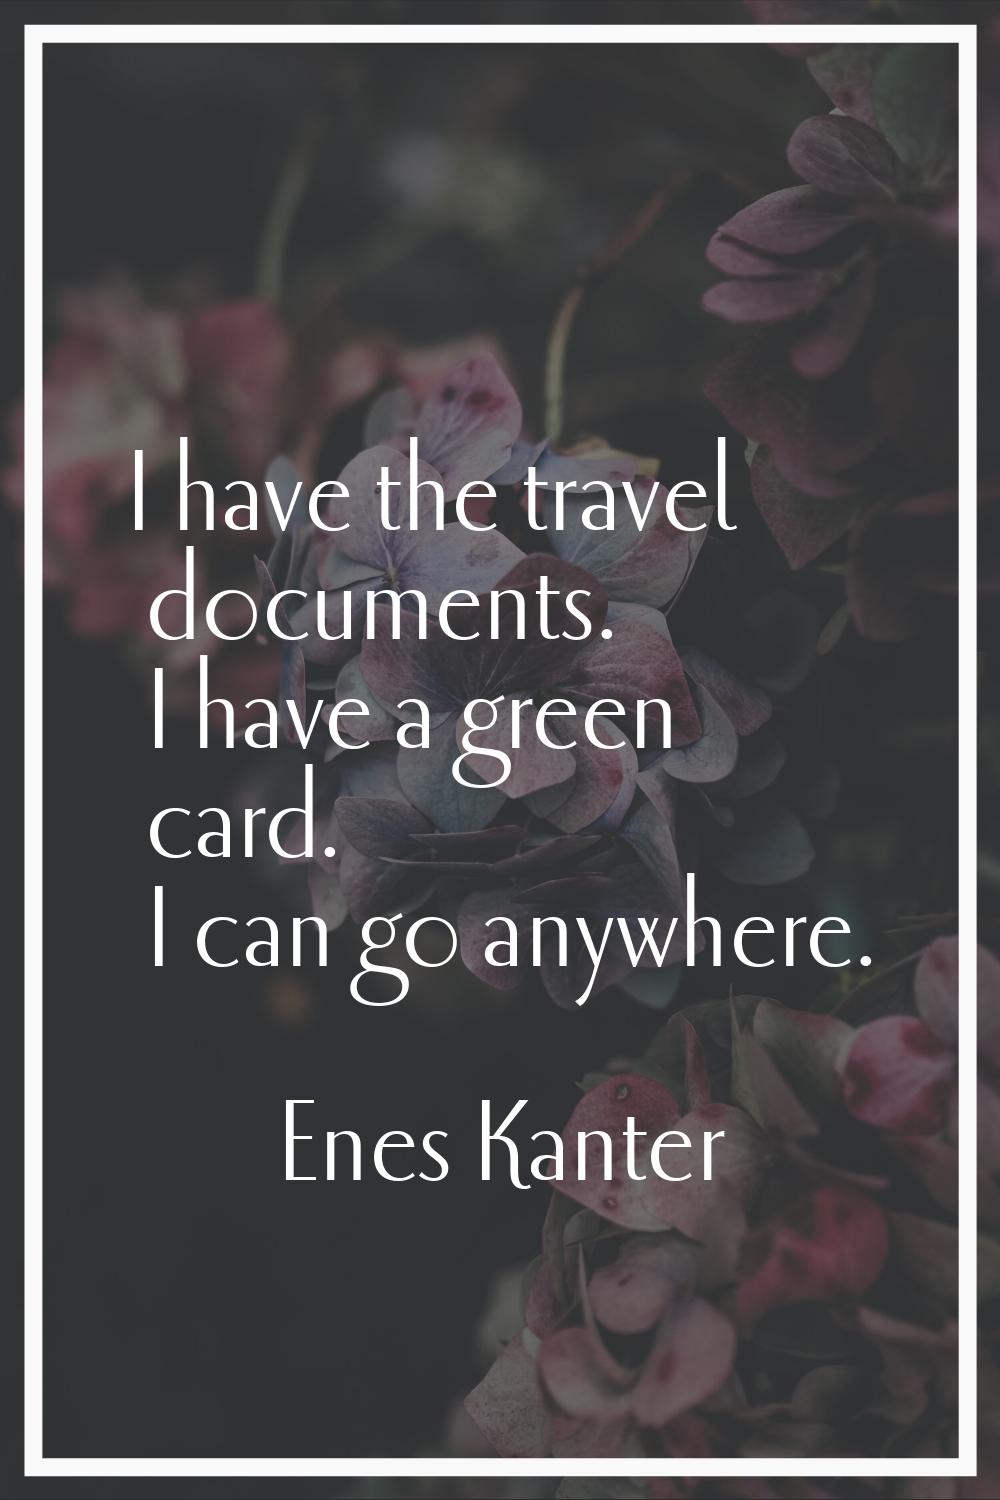 I have the travel documents. I have a green card. I can go anywhere.